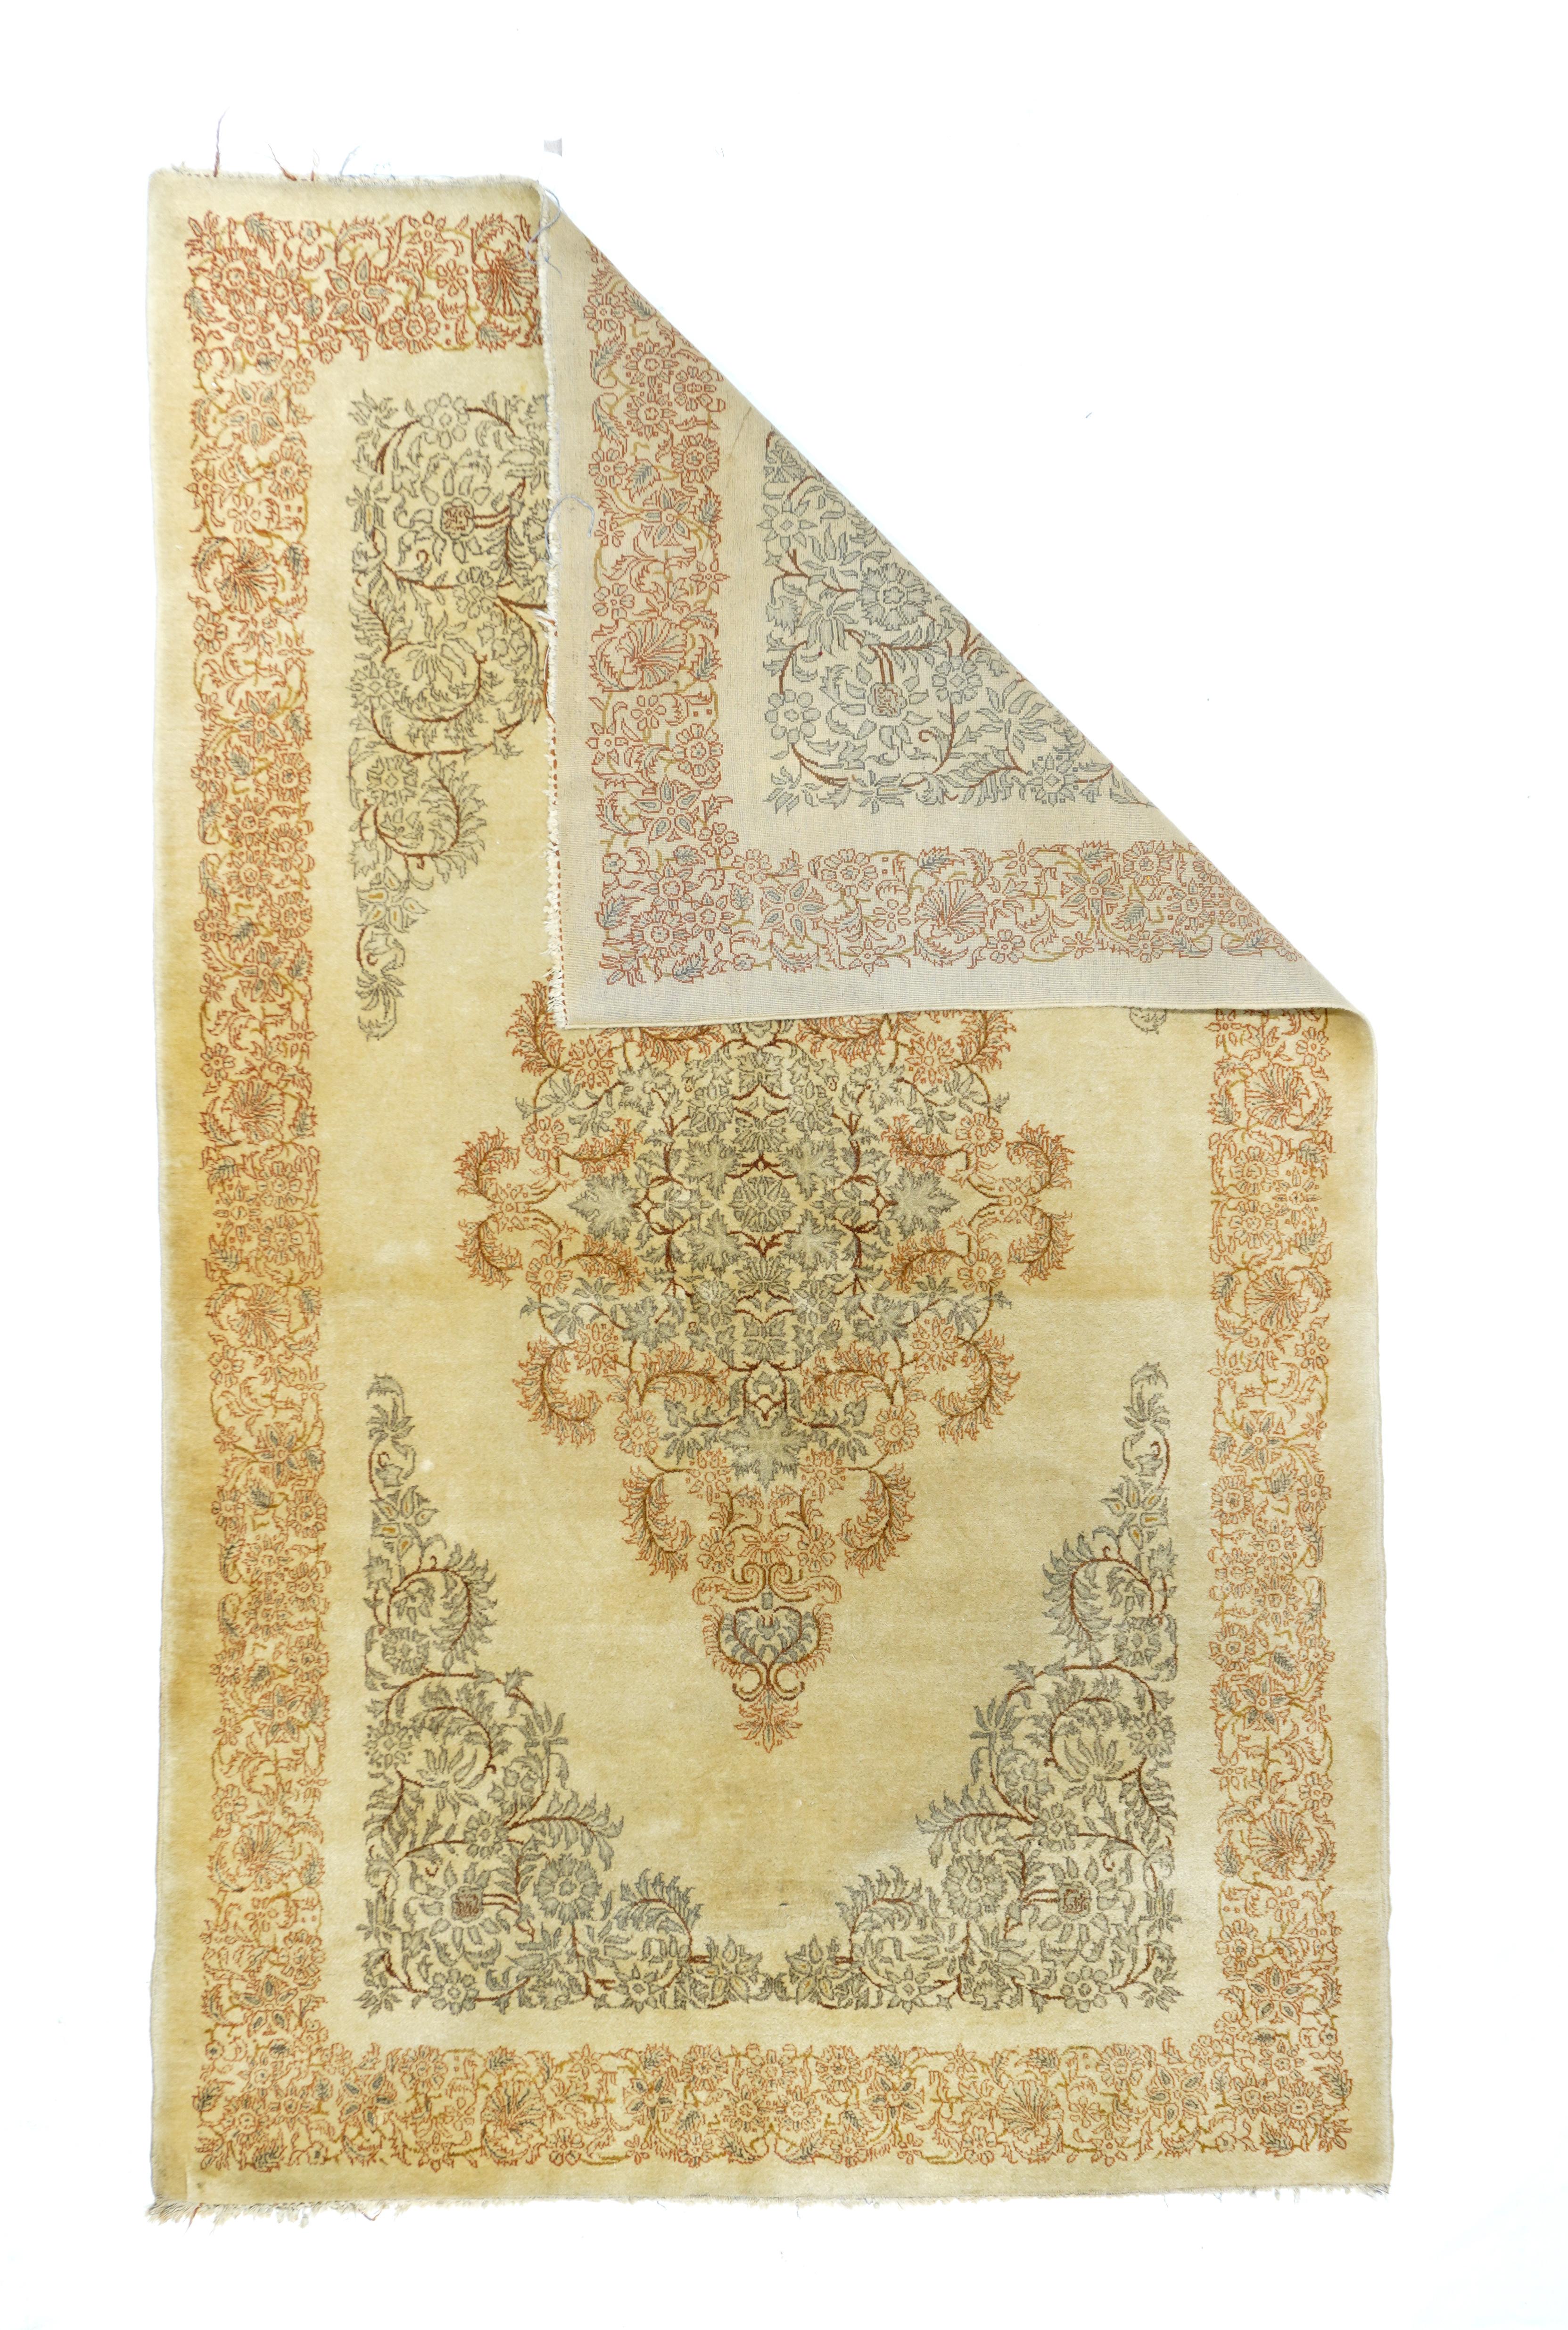 Vintage Kashan Rug 4'3'' x 7'3''. This vintage, well-woven city scatter shows a soft, 196=50's Kerman-style palette with an open straw-sand field dominated by a tall lozenge medallion partially defined by barbed, curved leaves. En suite corners.